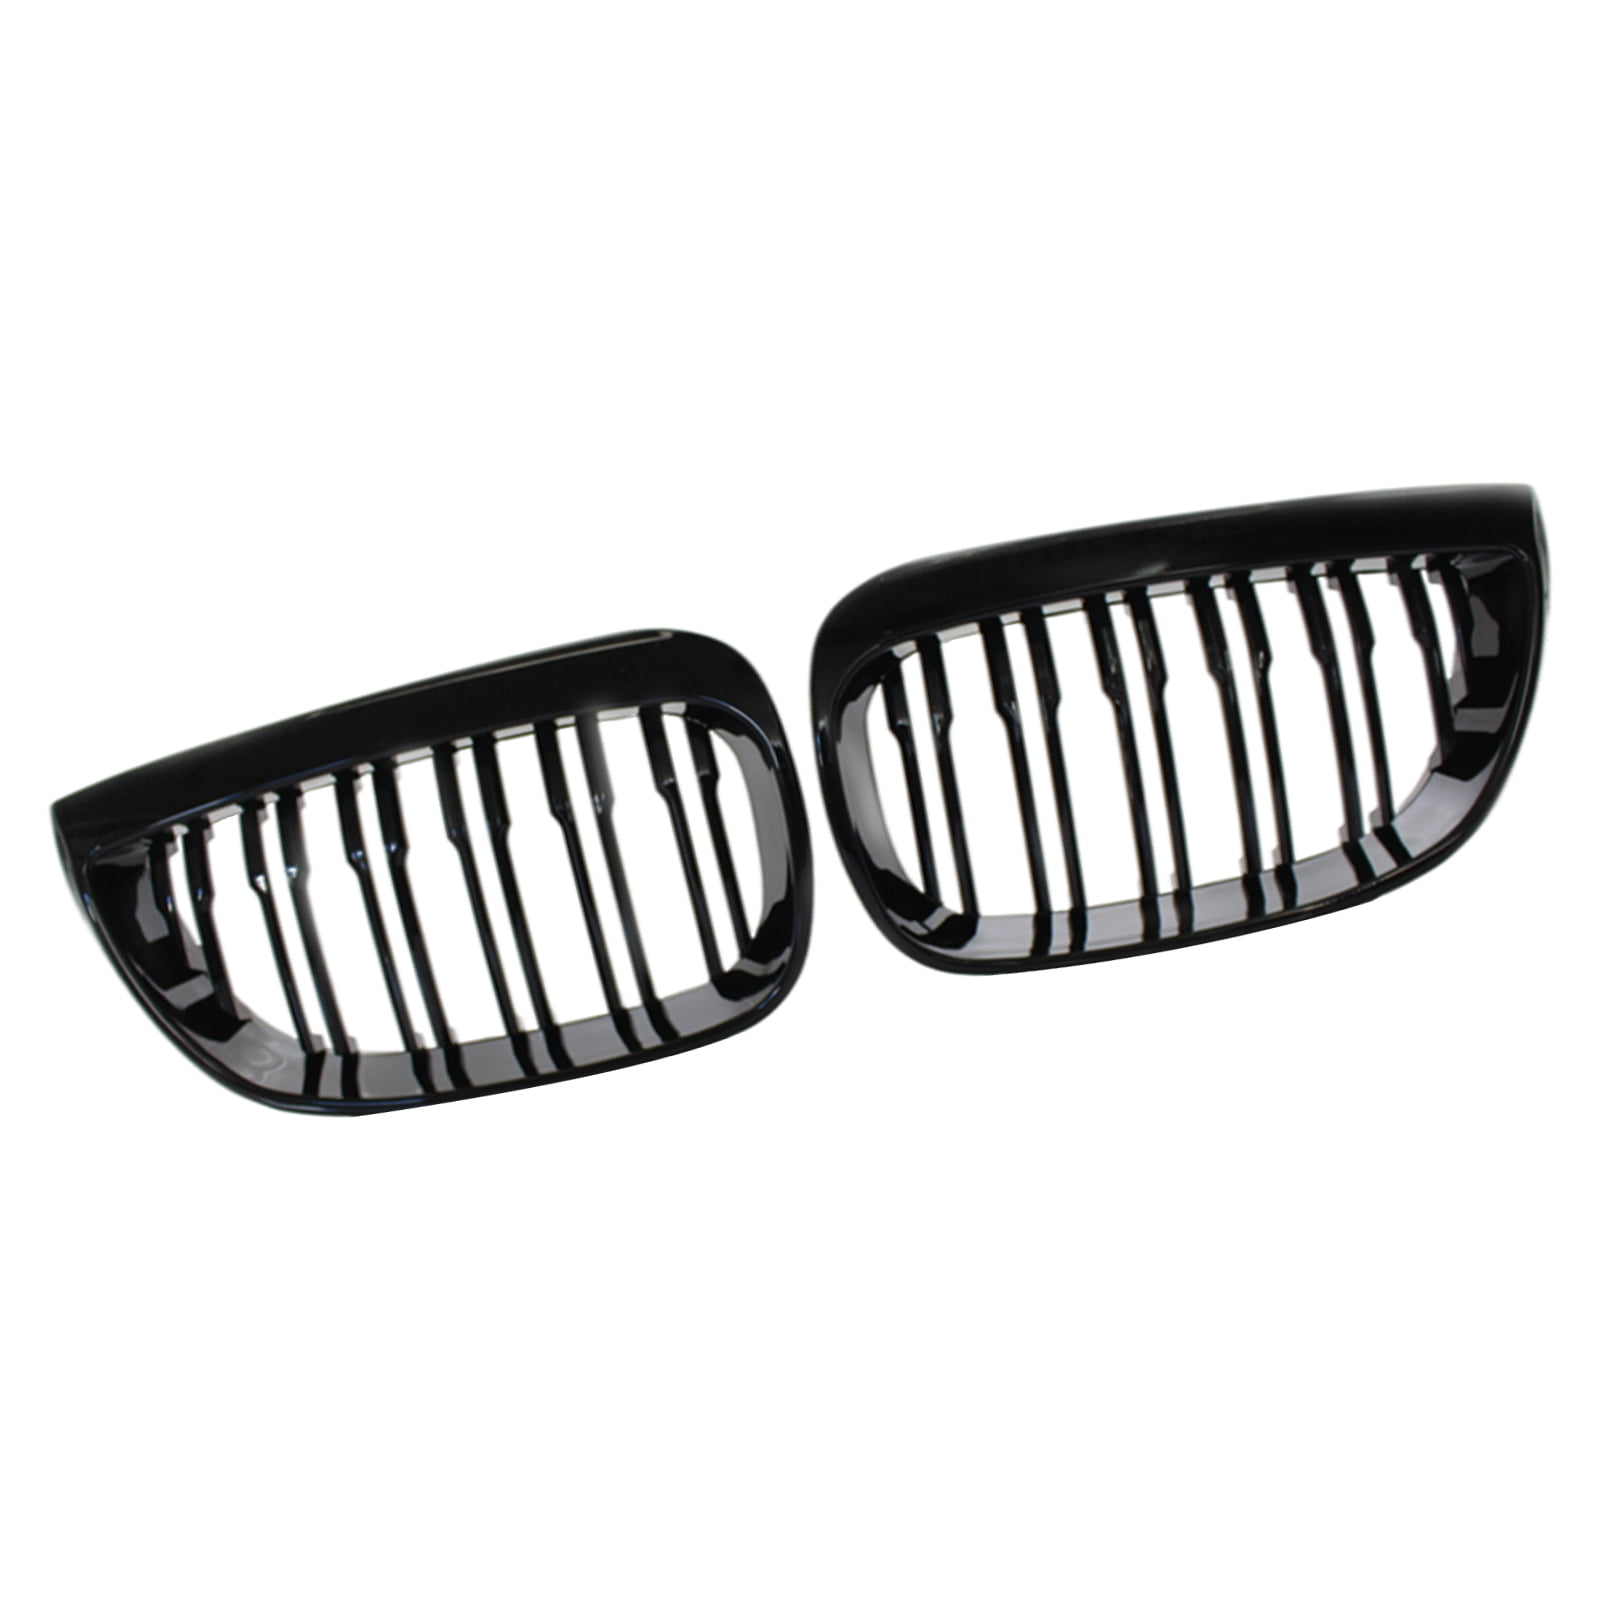 show original title Details about   Grill Radiator Grill Set for BMW E81 07-12 with M-Package BLACK MATT KIDNEY Replacement